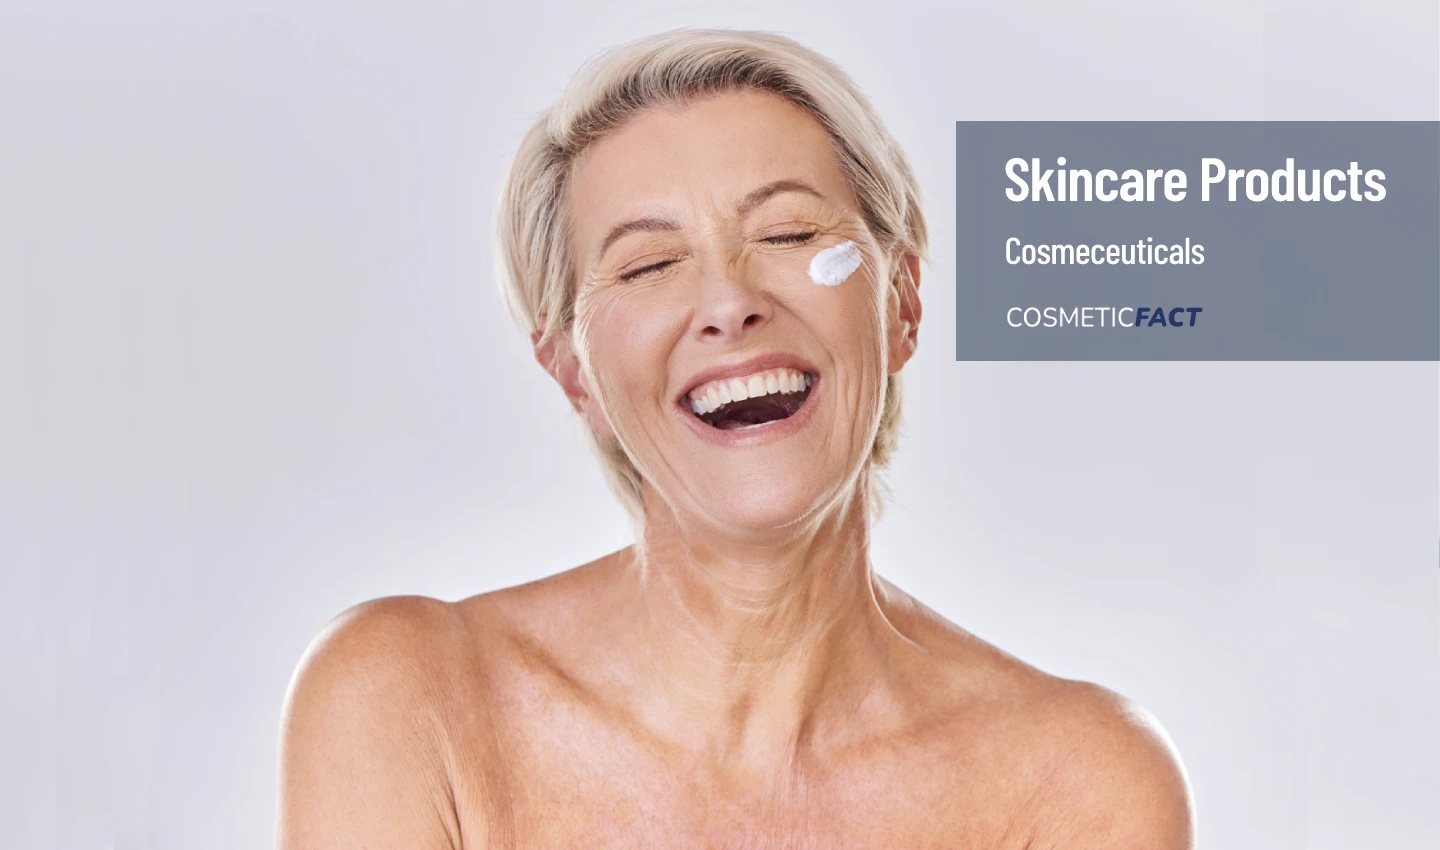 Mature lady with radiant skin, looking satisfied after using Retinol Skincare products.